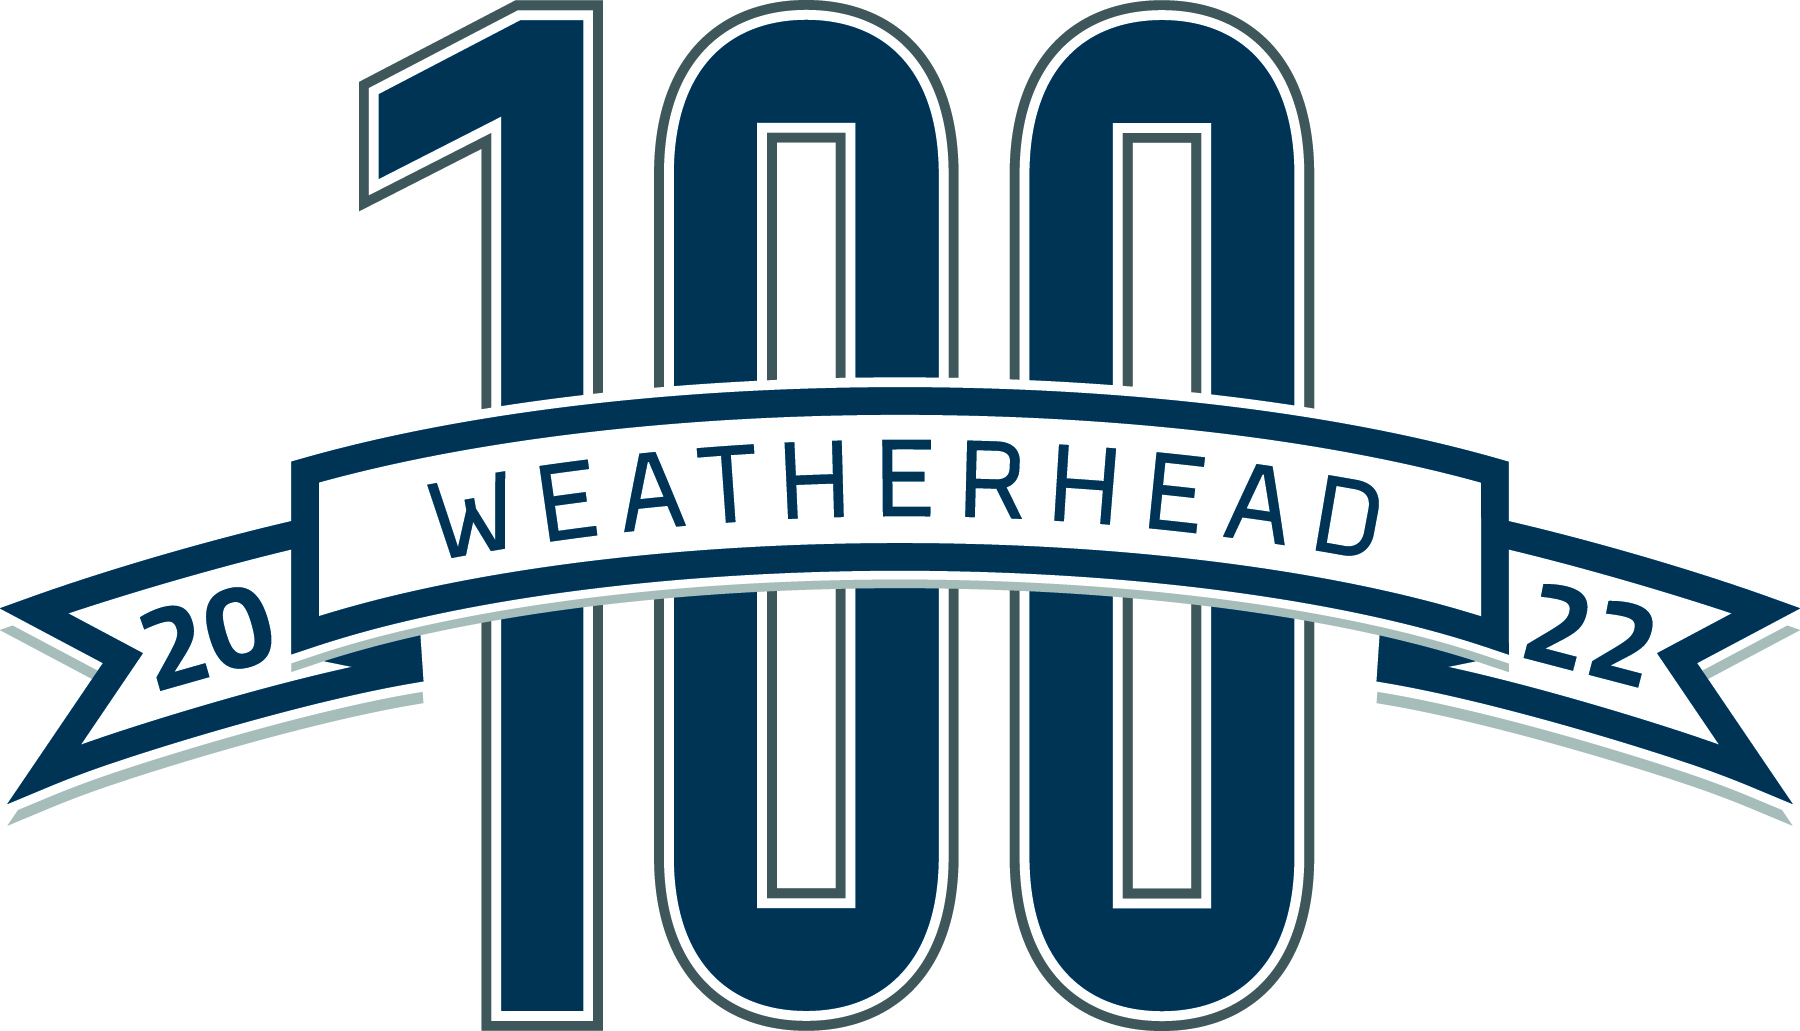 Case Western Reserve Names Carver Financial to its 2022 Weatherhead 100 List